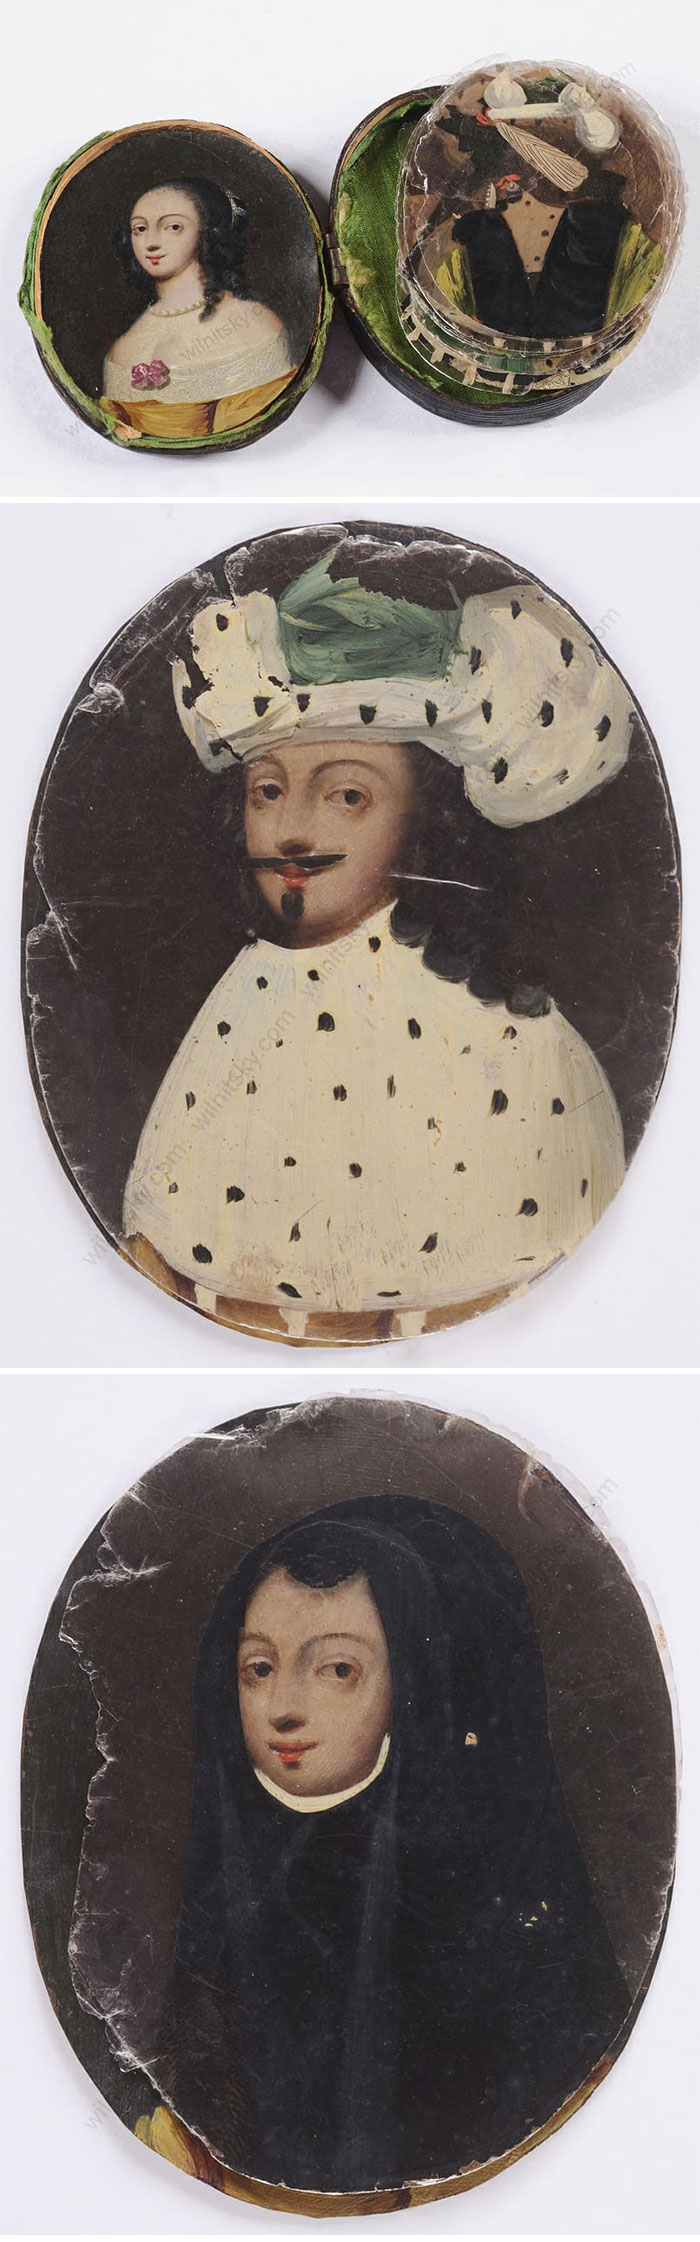 A Woman Of Many Disguises! This Is An Example Of An Unusual Fad From The Mid-1600s: Miniature Oil Portraits That Came With Clear Slices Of Mica Painted With Different Costumes